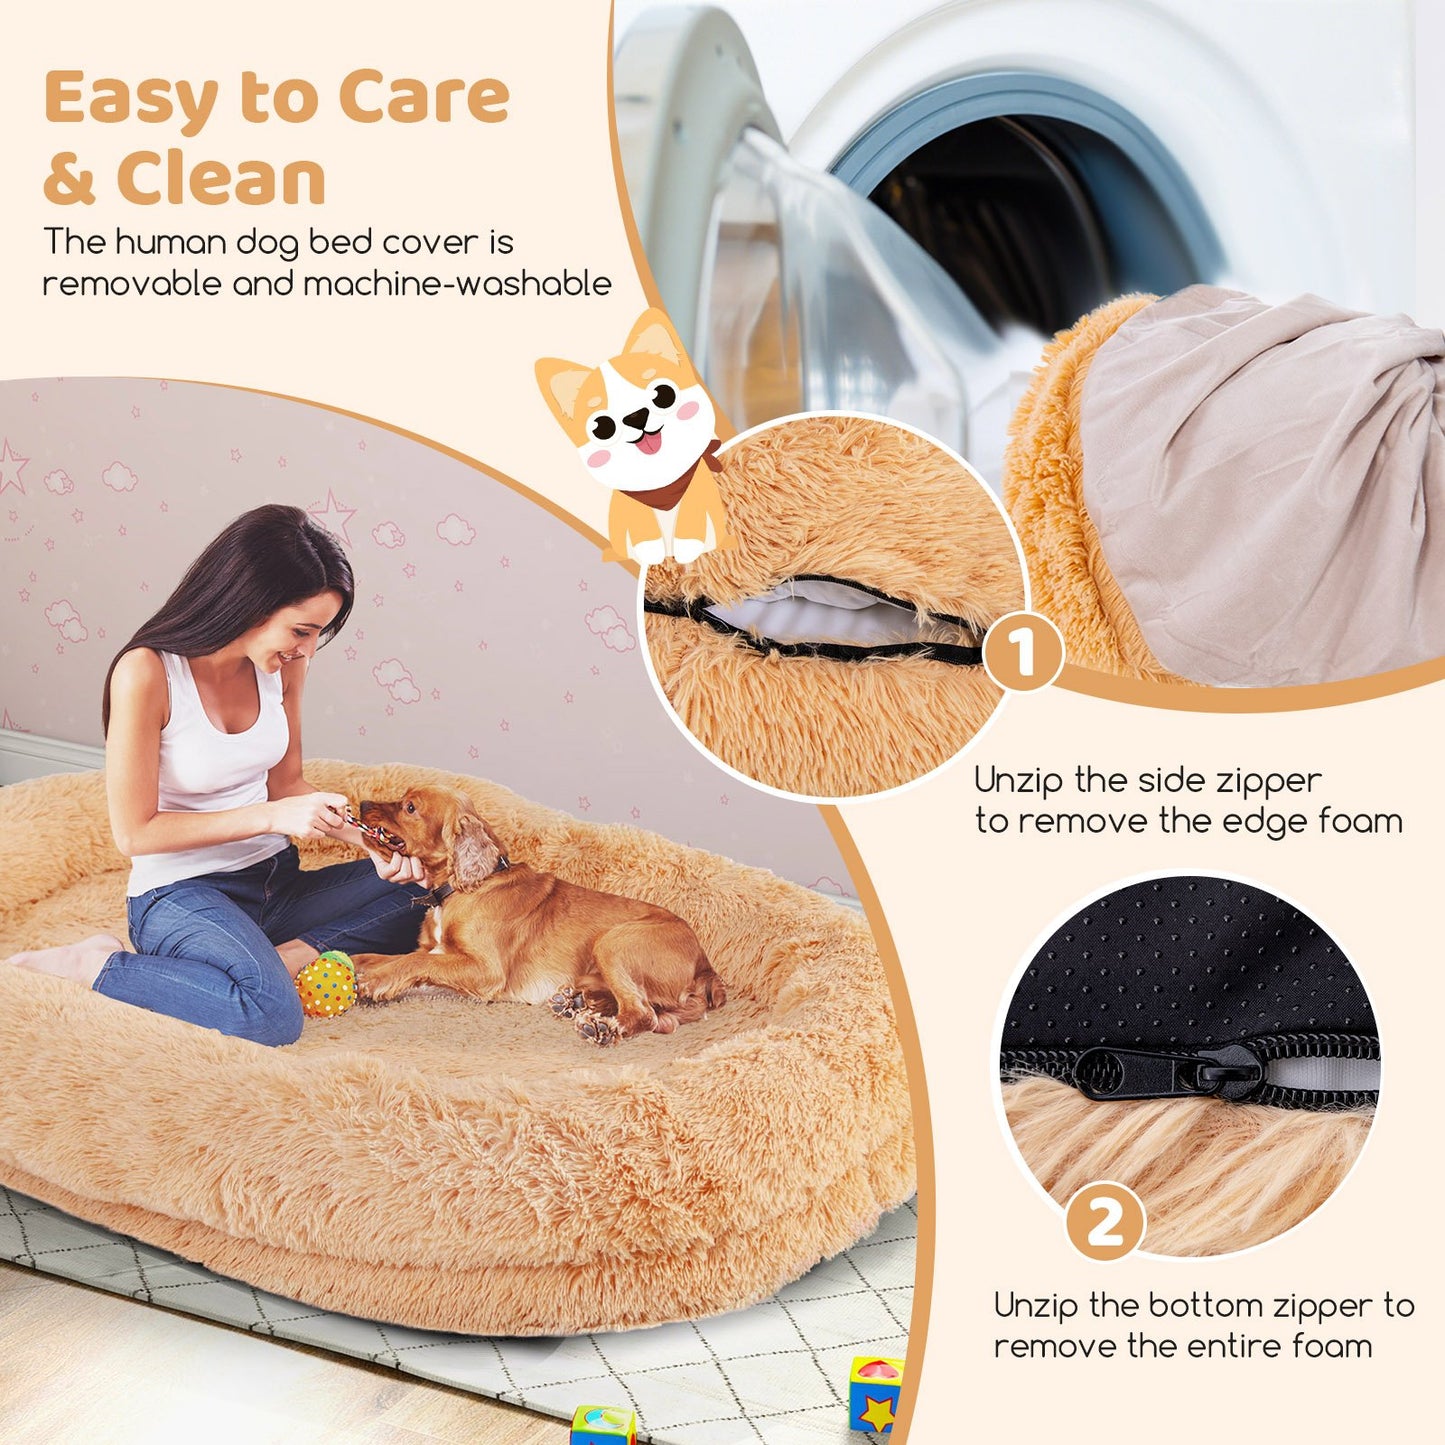 Washable Fluffy Human Dog Bed with Soft Blanket and Plump Pillow, Brown